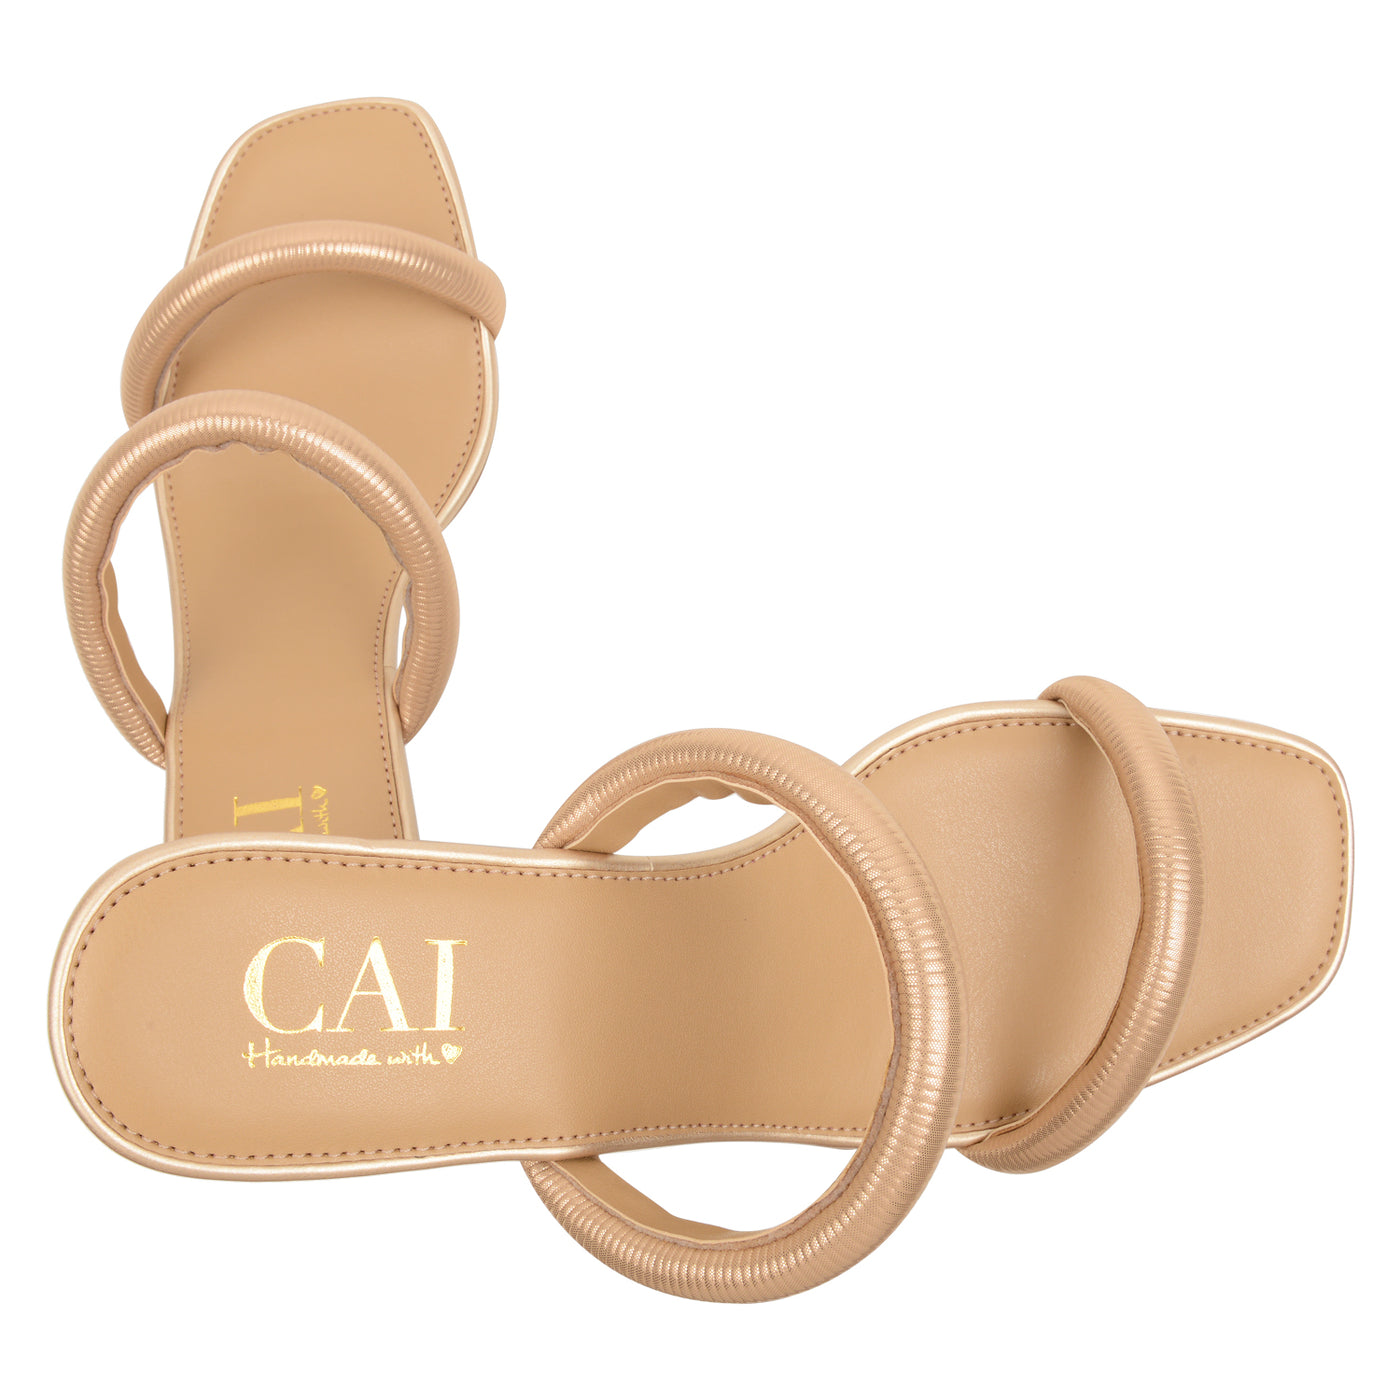 Snow Gold Heels at The Cai Store